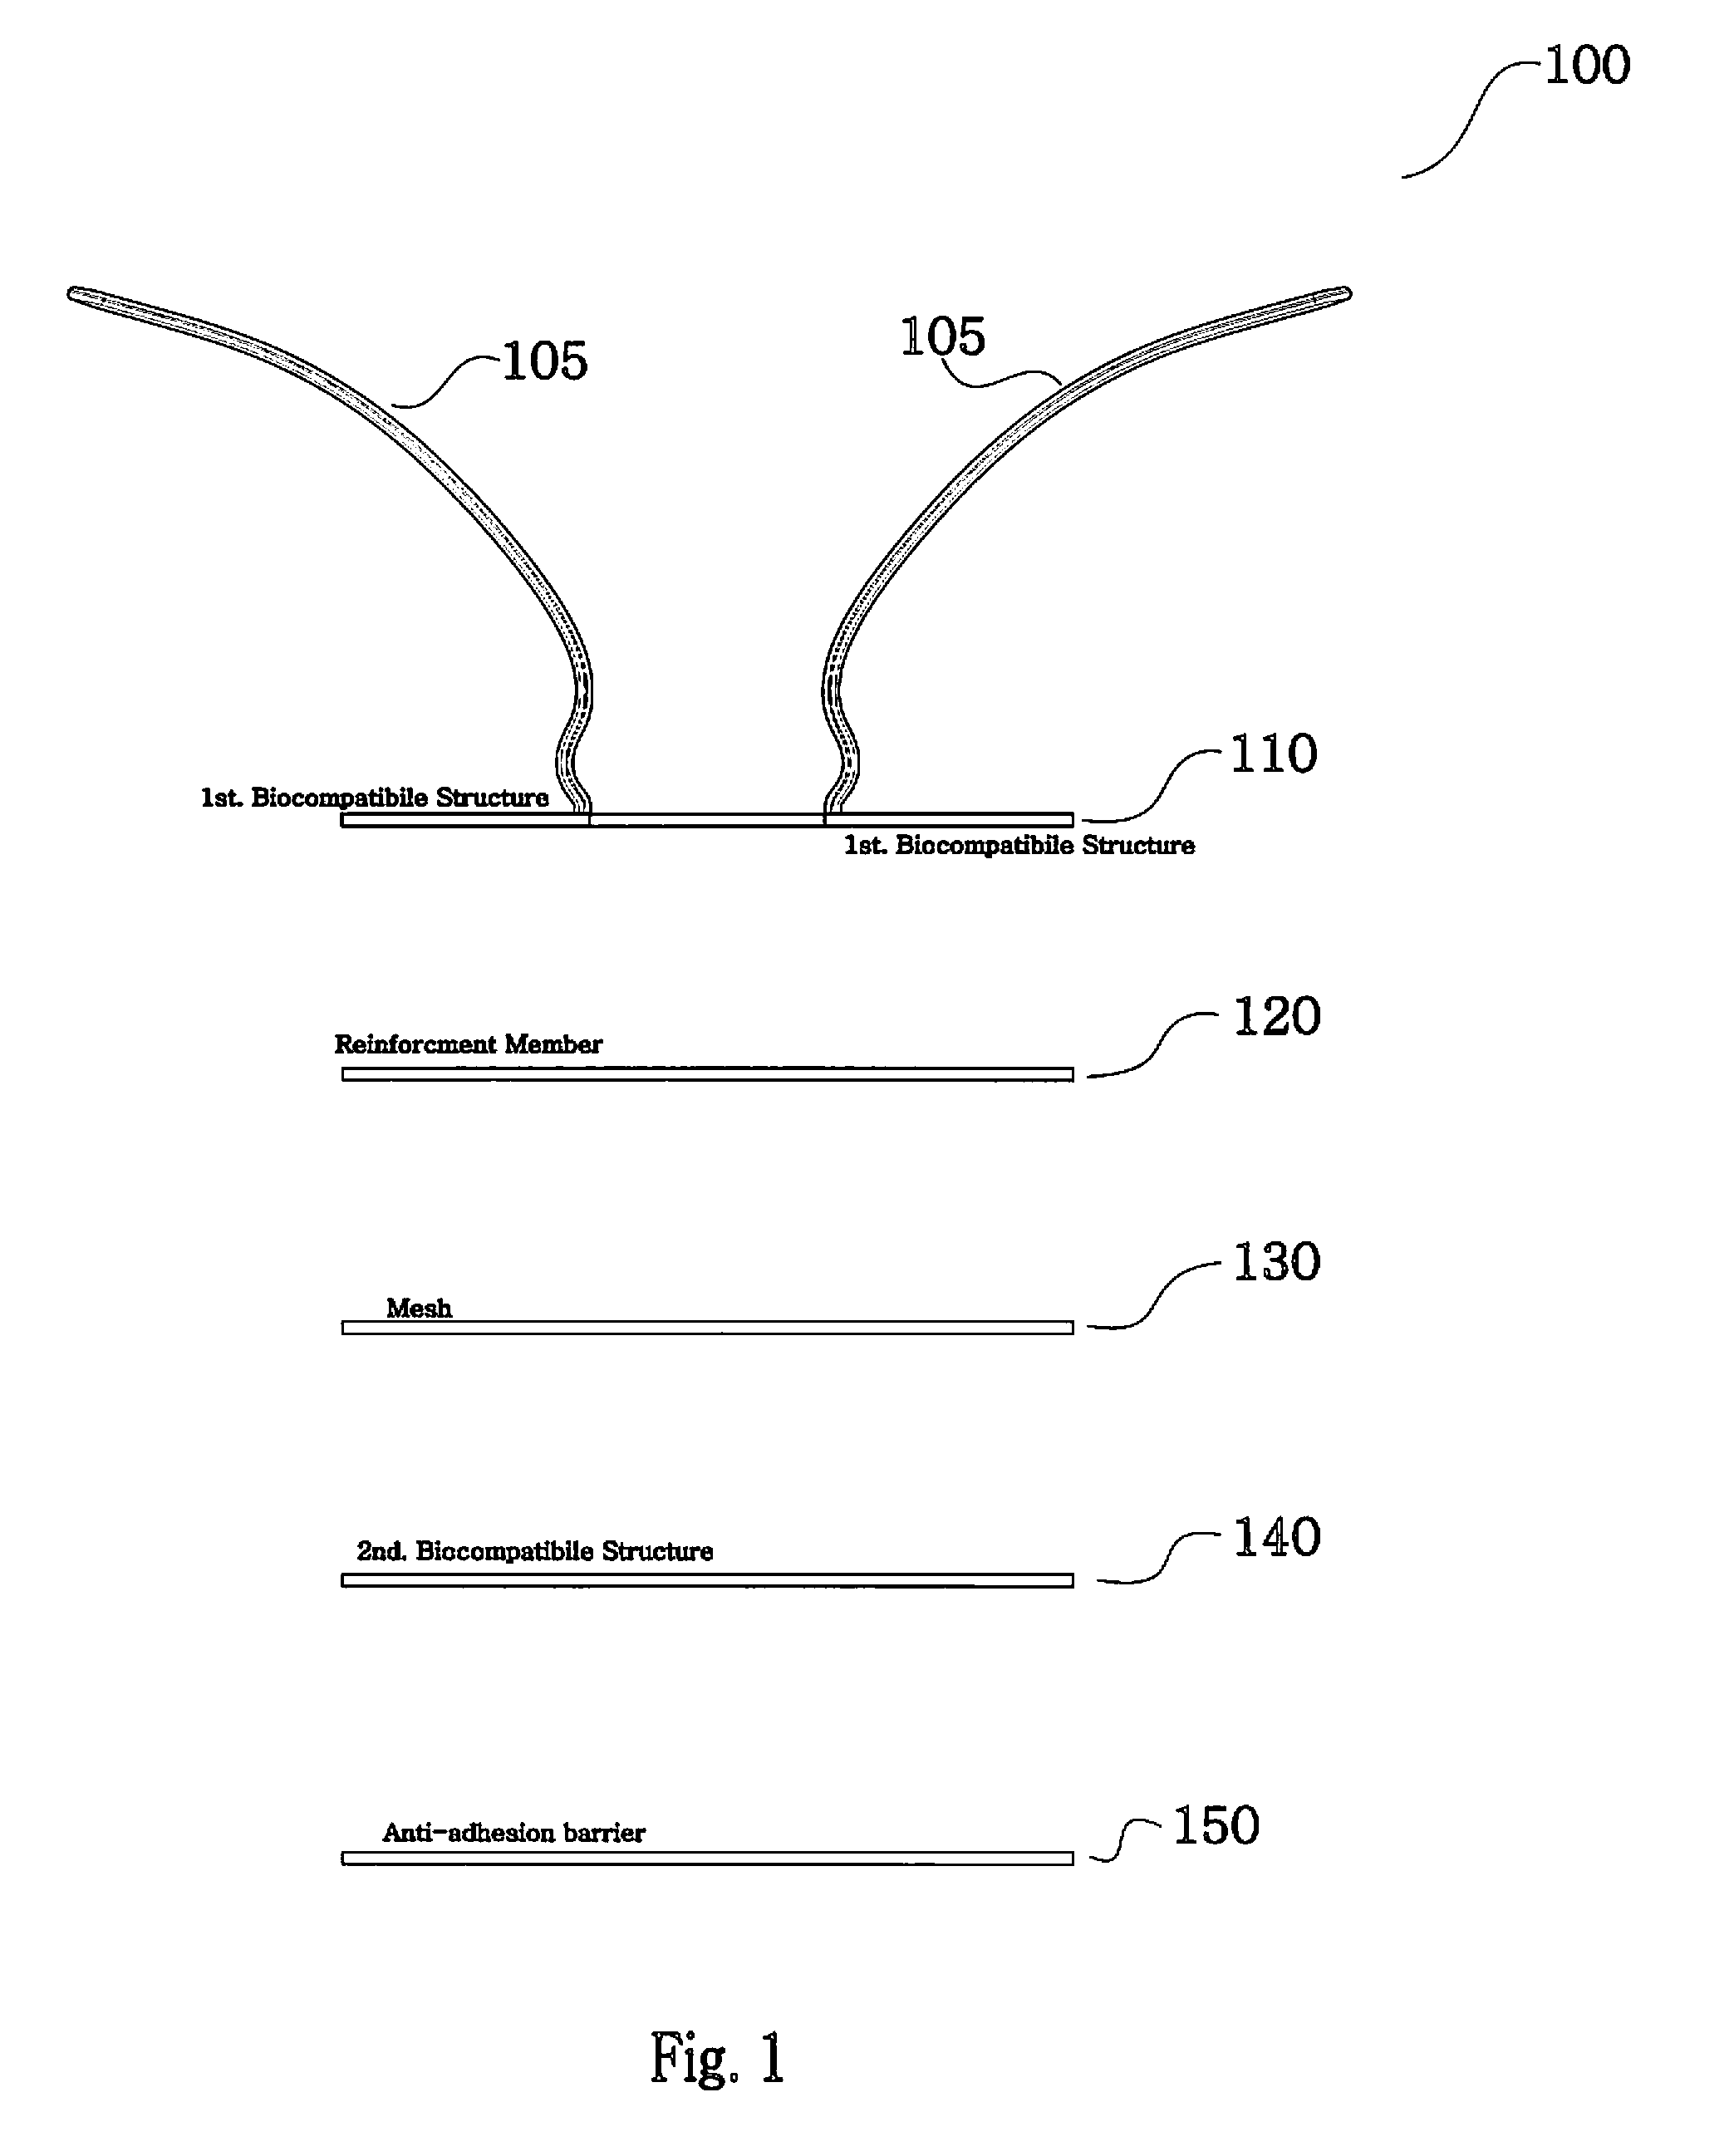 Implantable prosthesis for repairing or reinforcing an anatomical defect